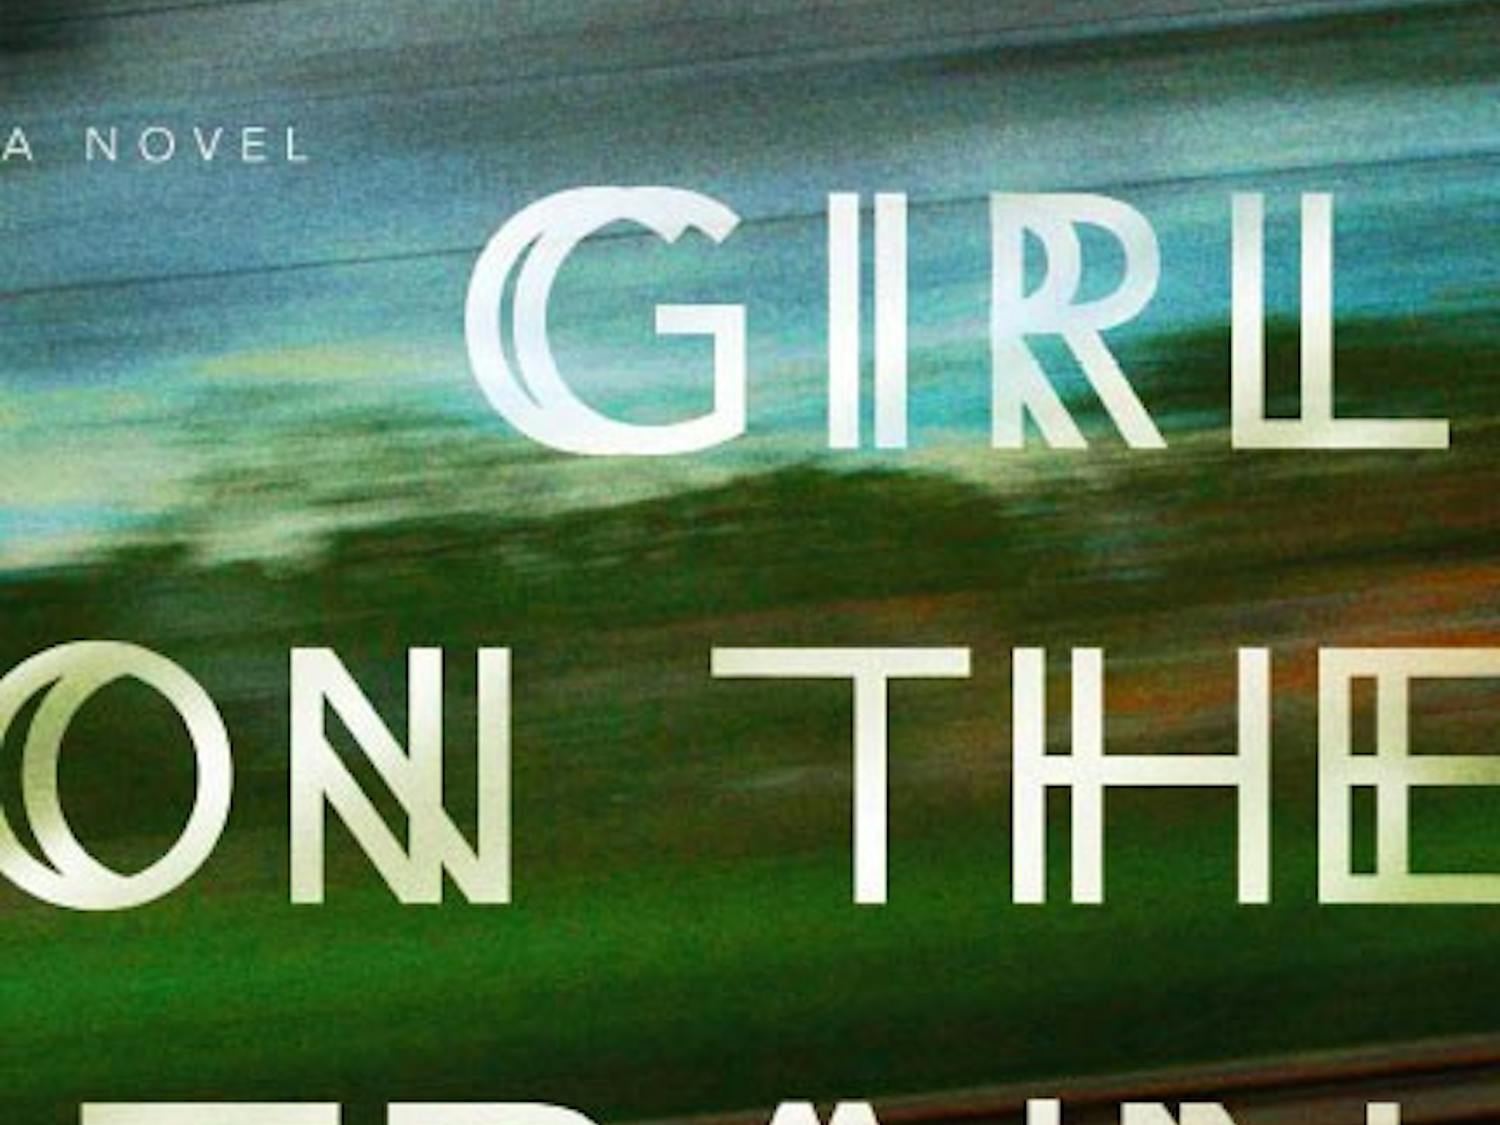 The film adaptation of the widely popular novel&nbsp;"The Girl on the Train" debuts later this year.